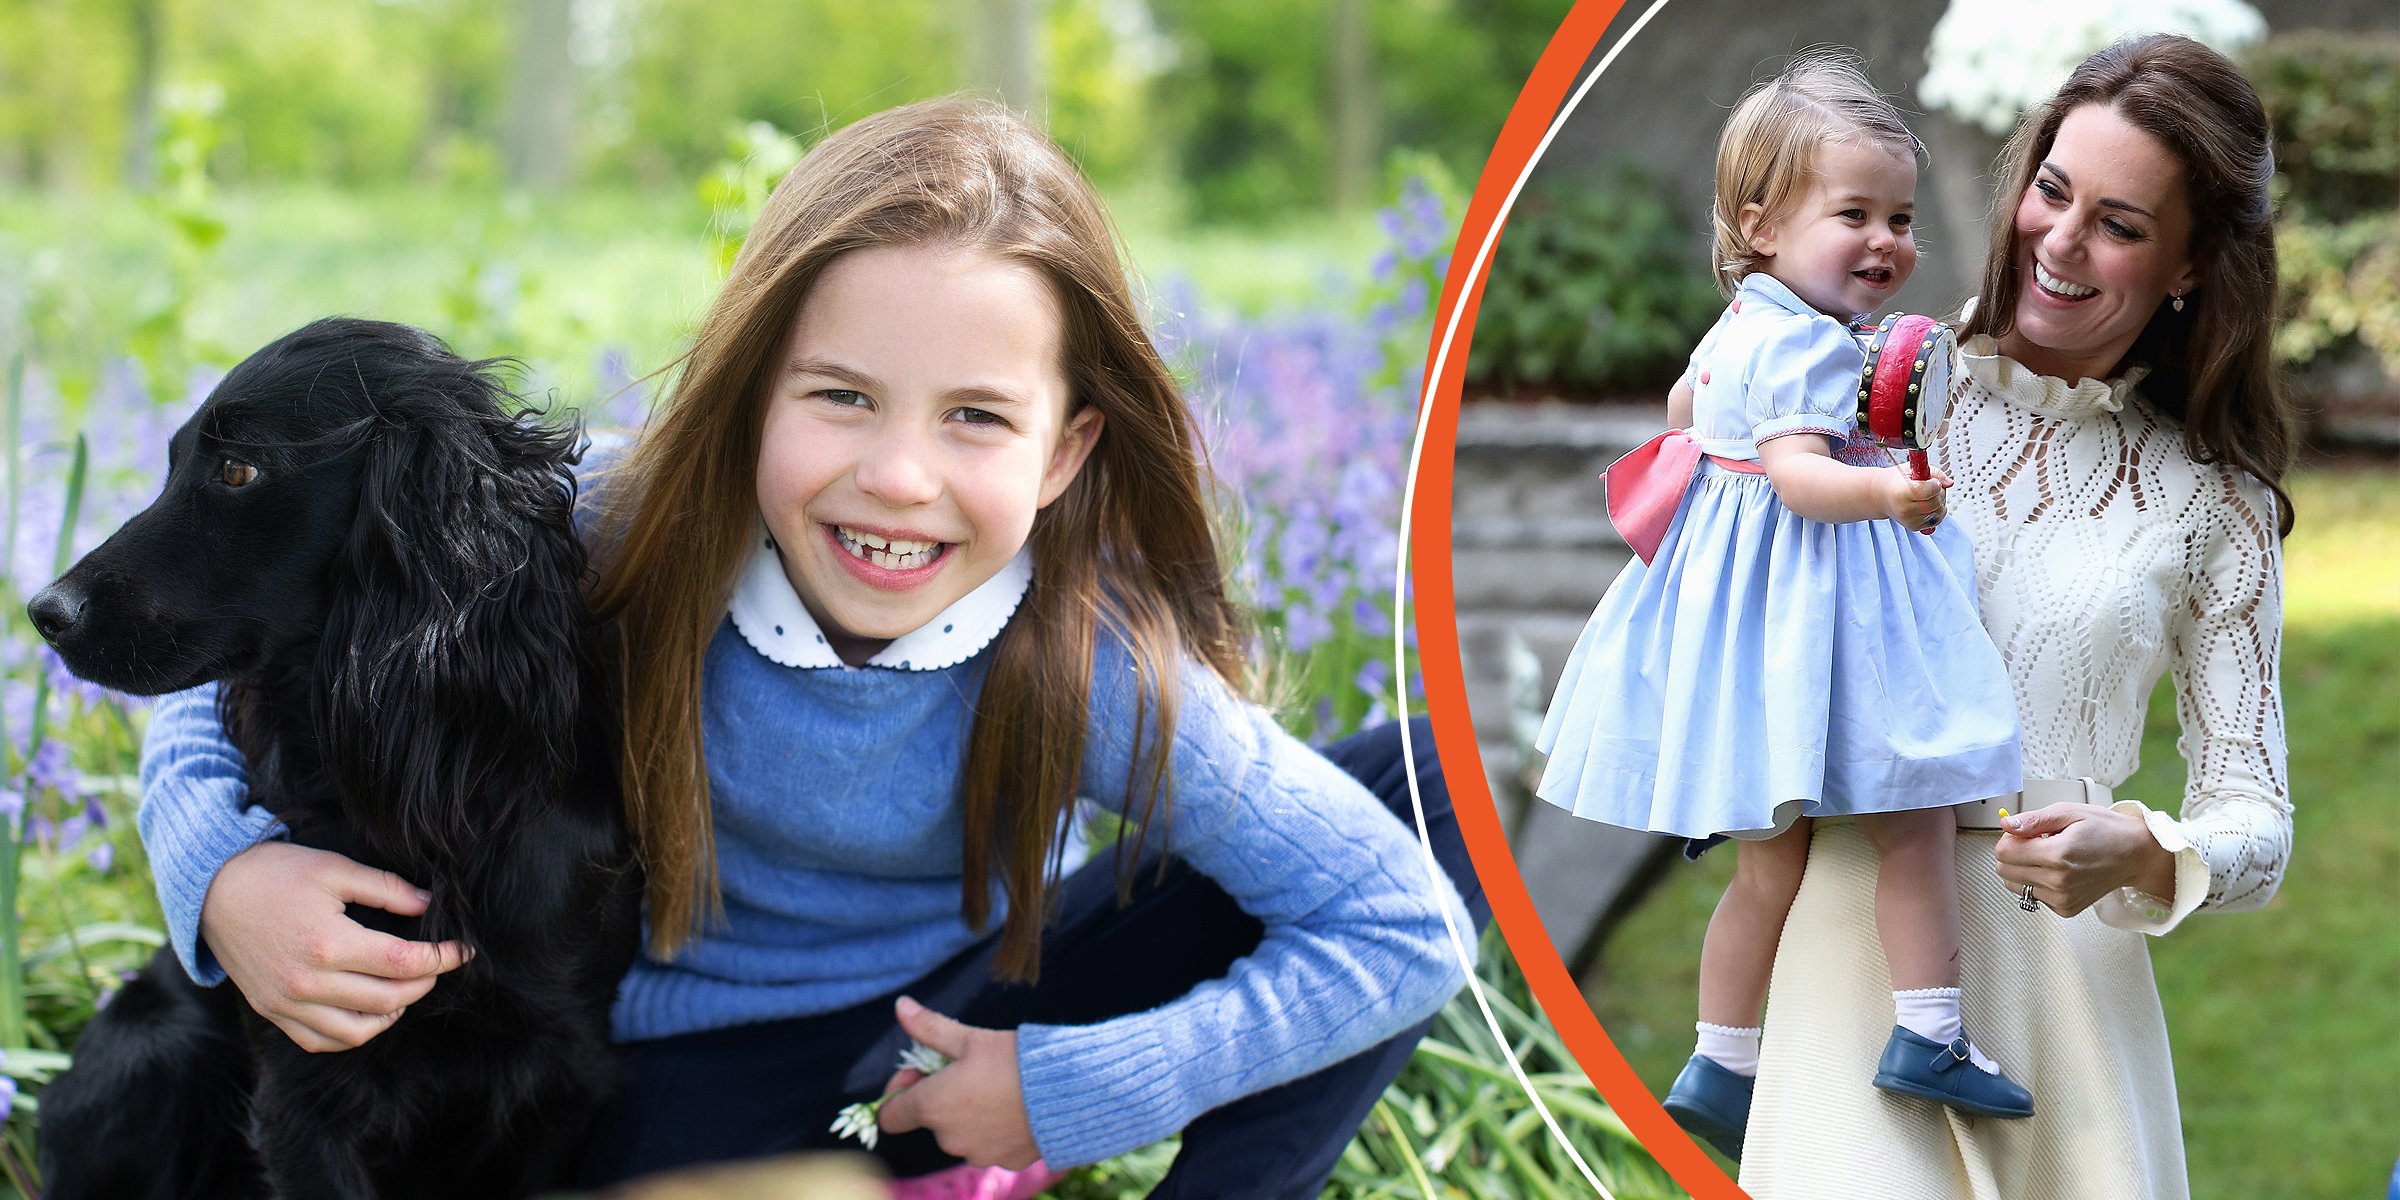 Princess Charlotte | Princess Charlotte and Duchess Kate | Source: Getty Images